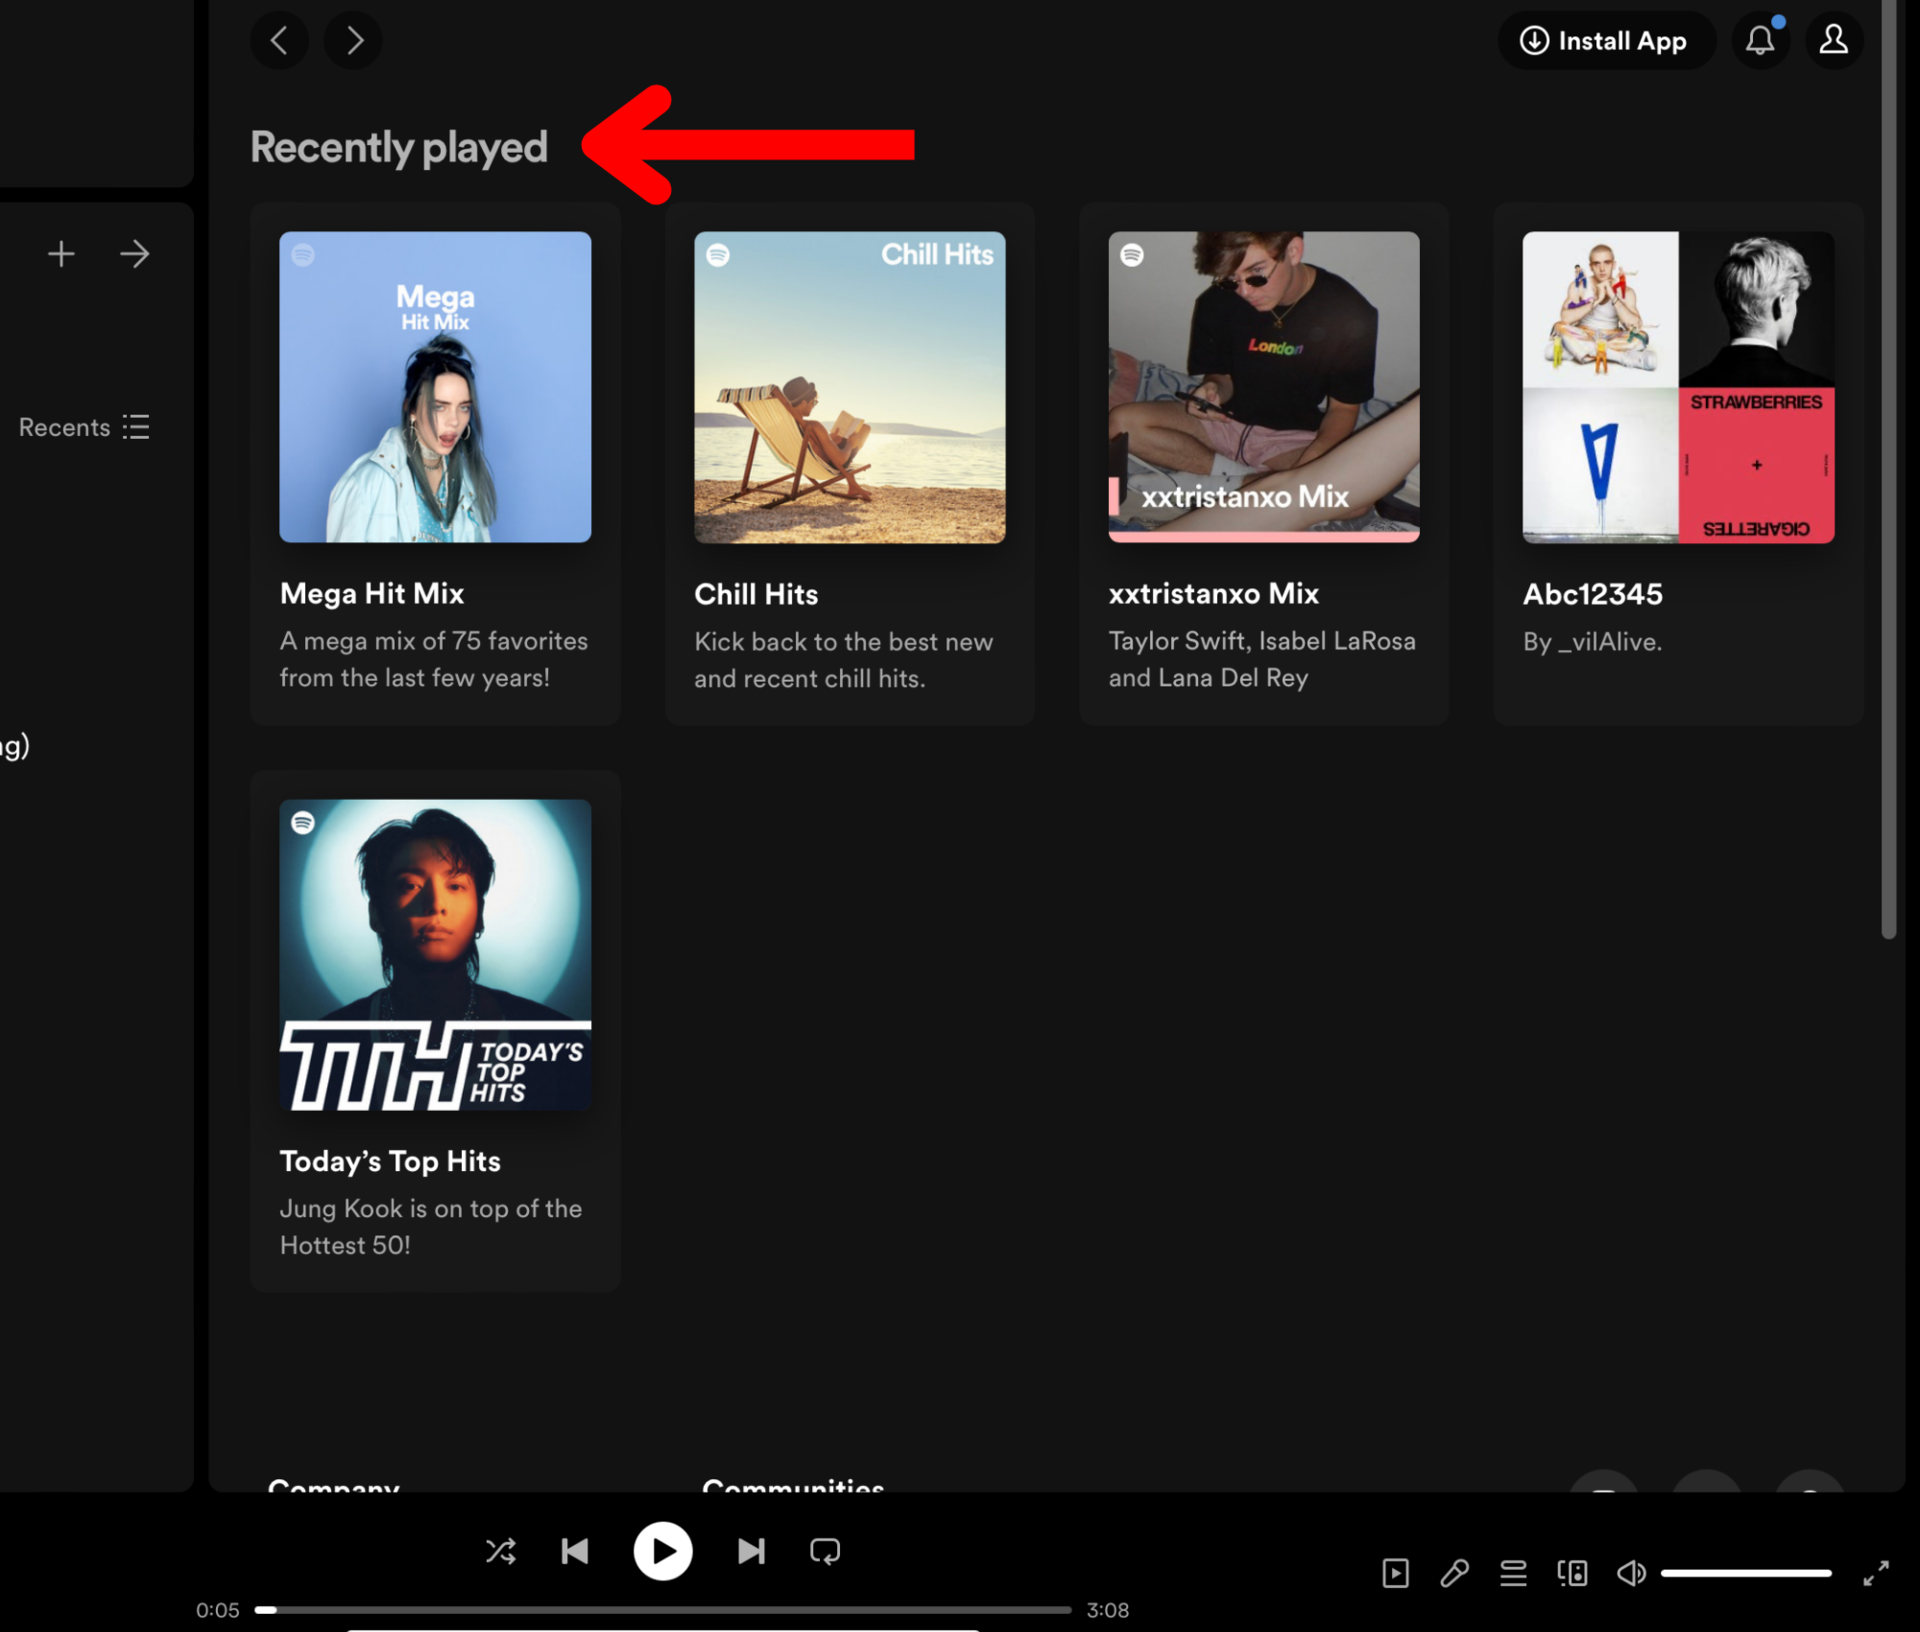 Spotify web player home screen recently played